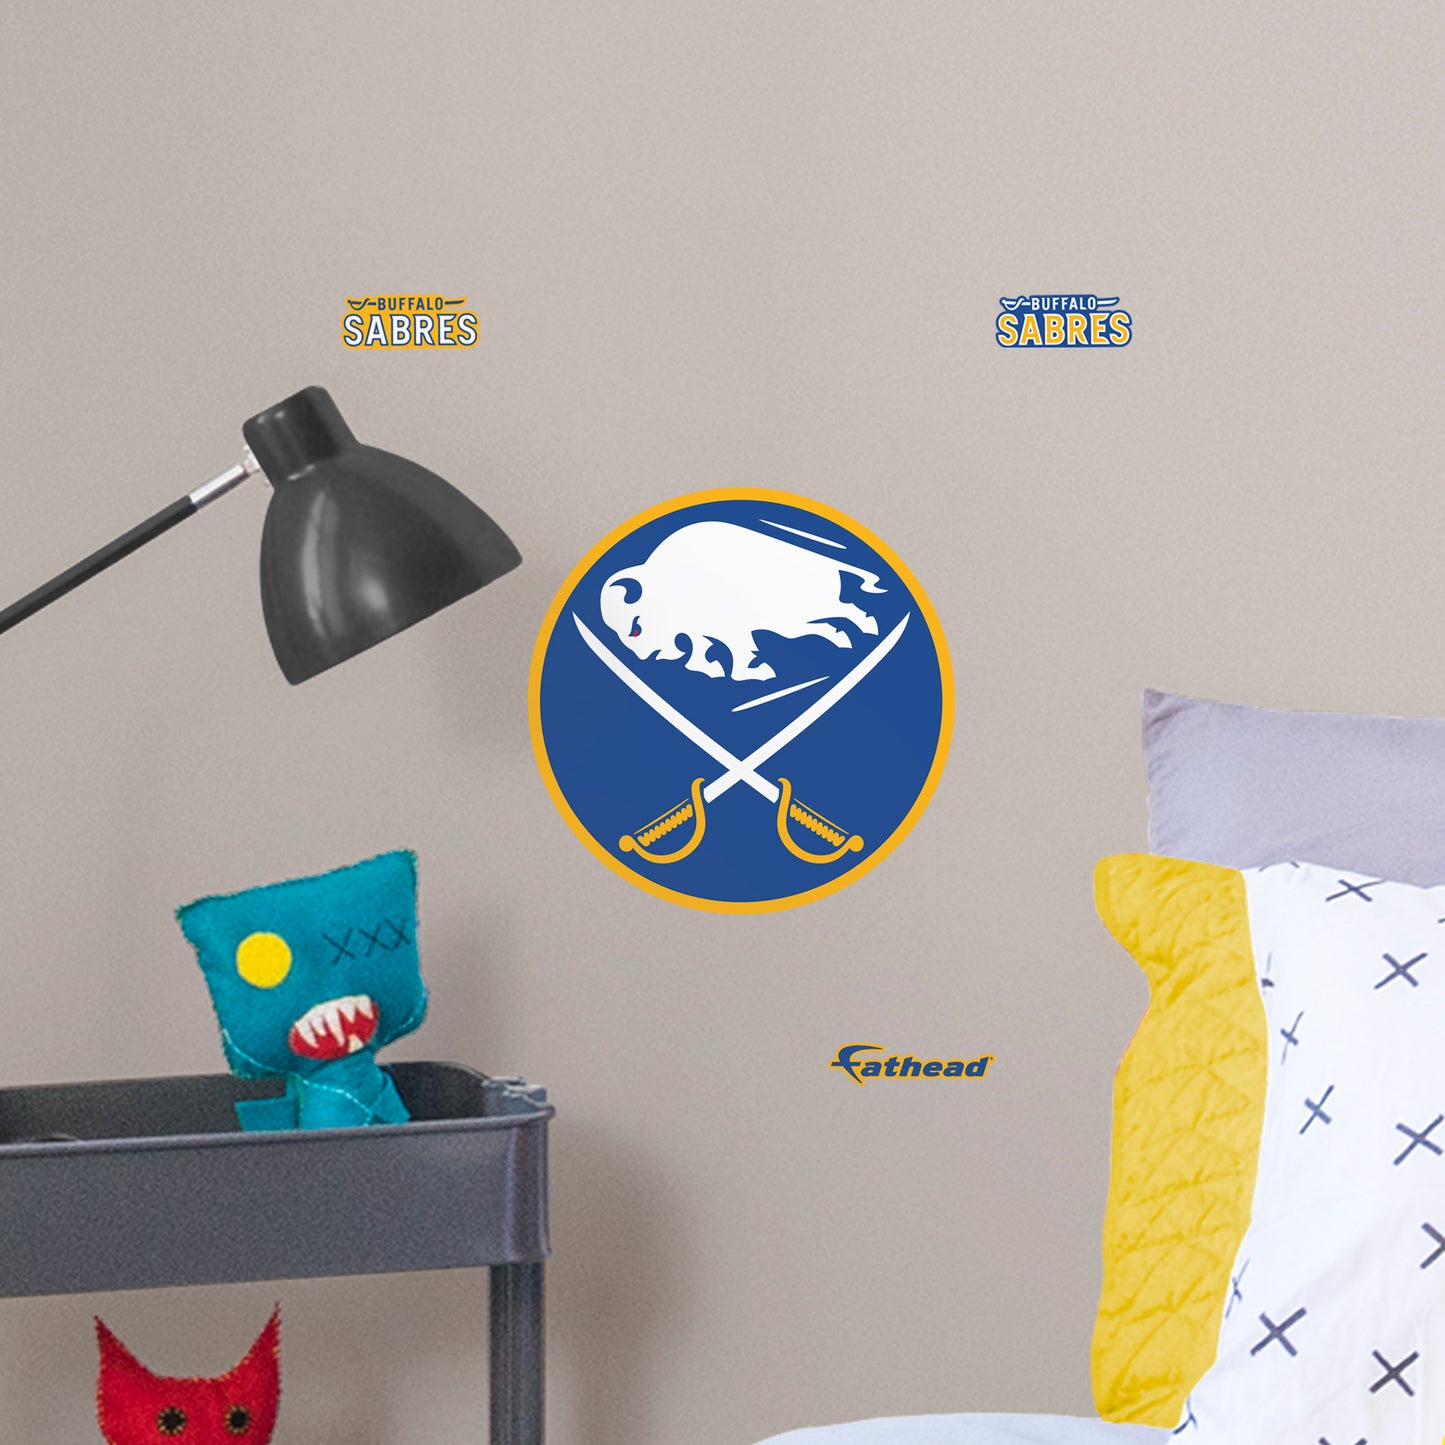 Buffalo Sabres 2020 POD Teammate Logo Officially Licensed NHL Removable Wall Decal